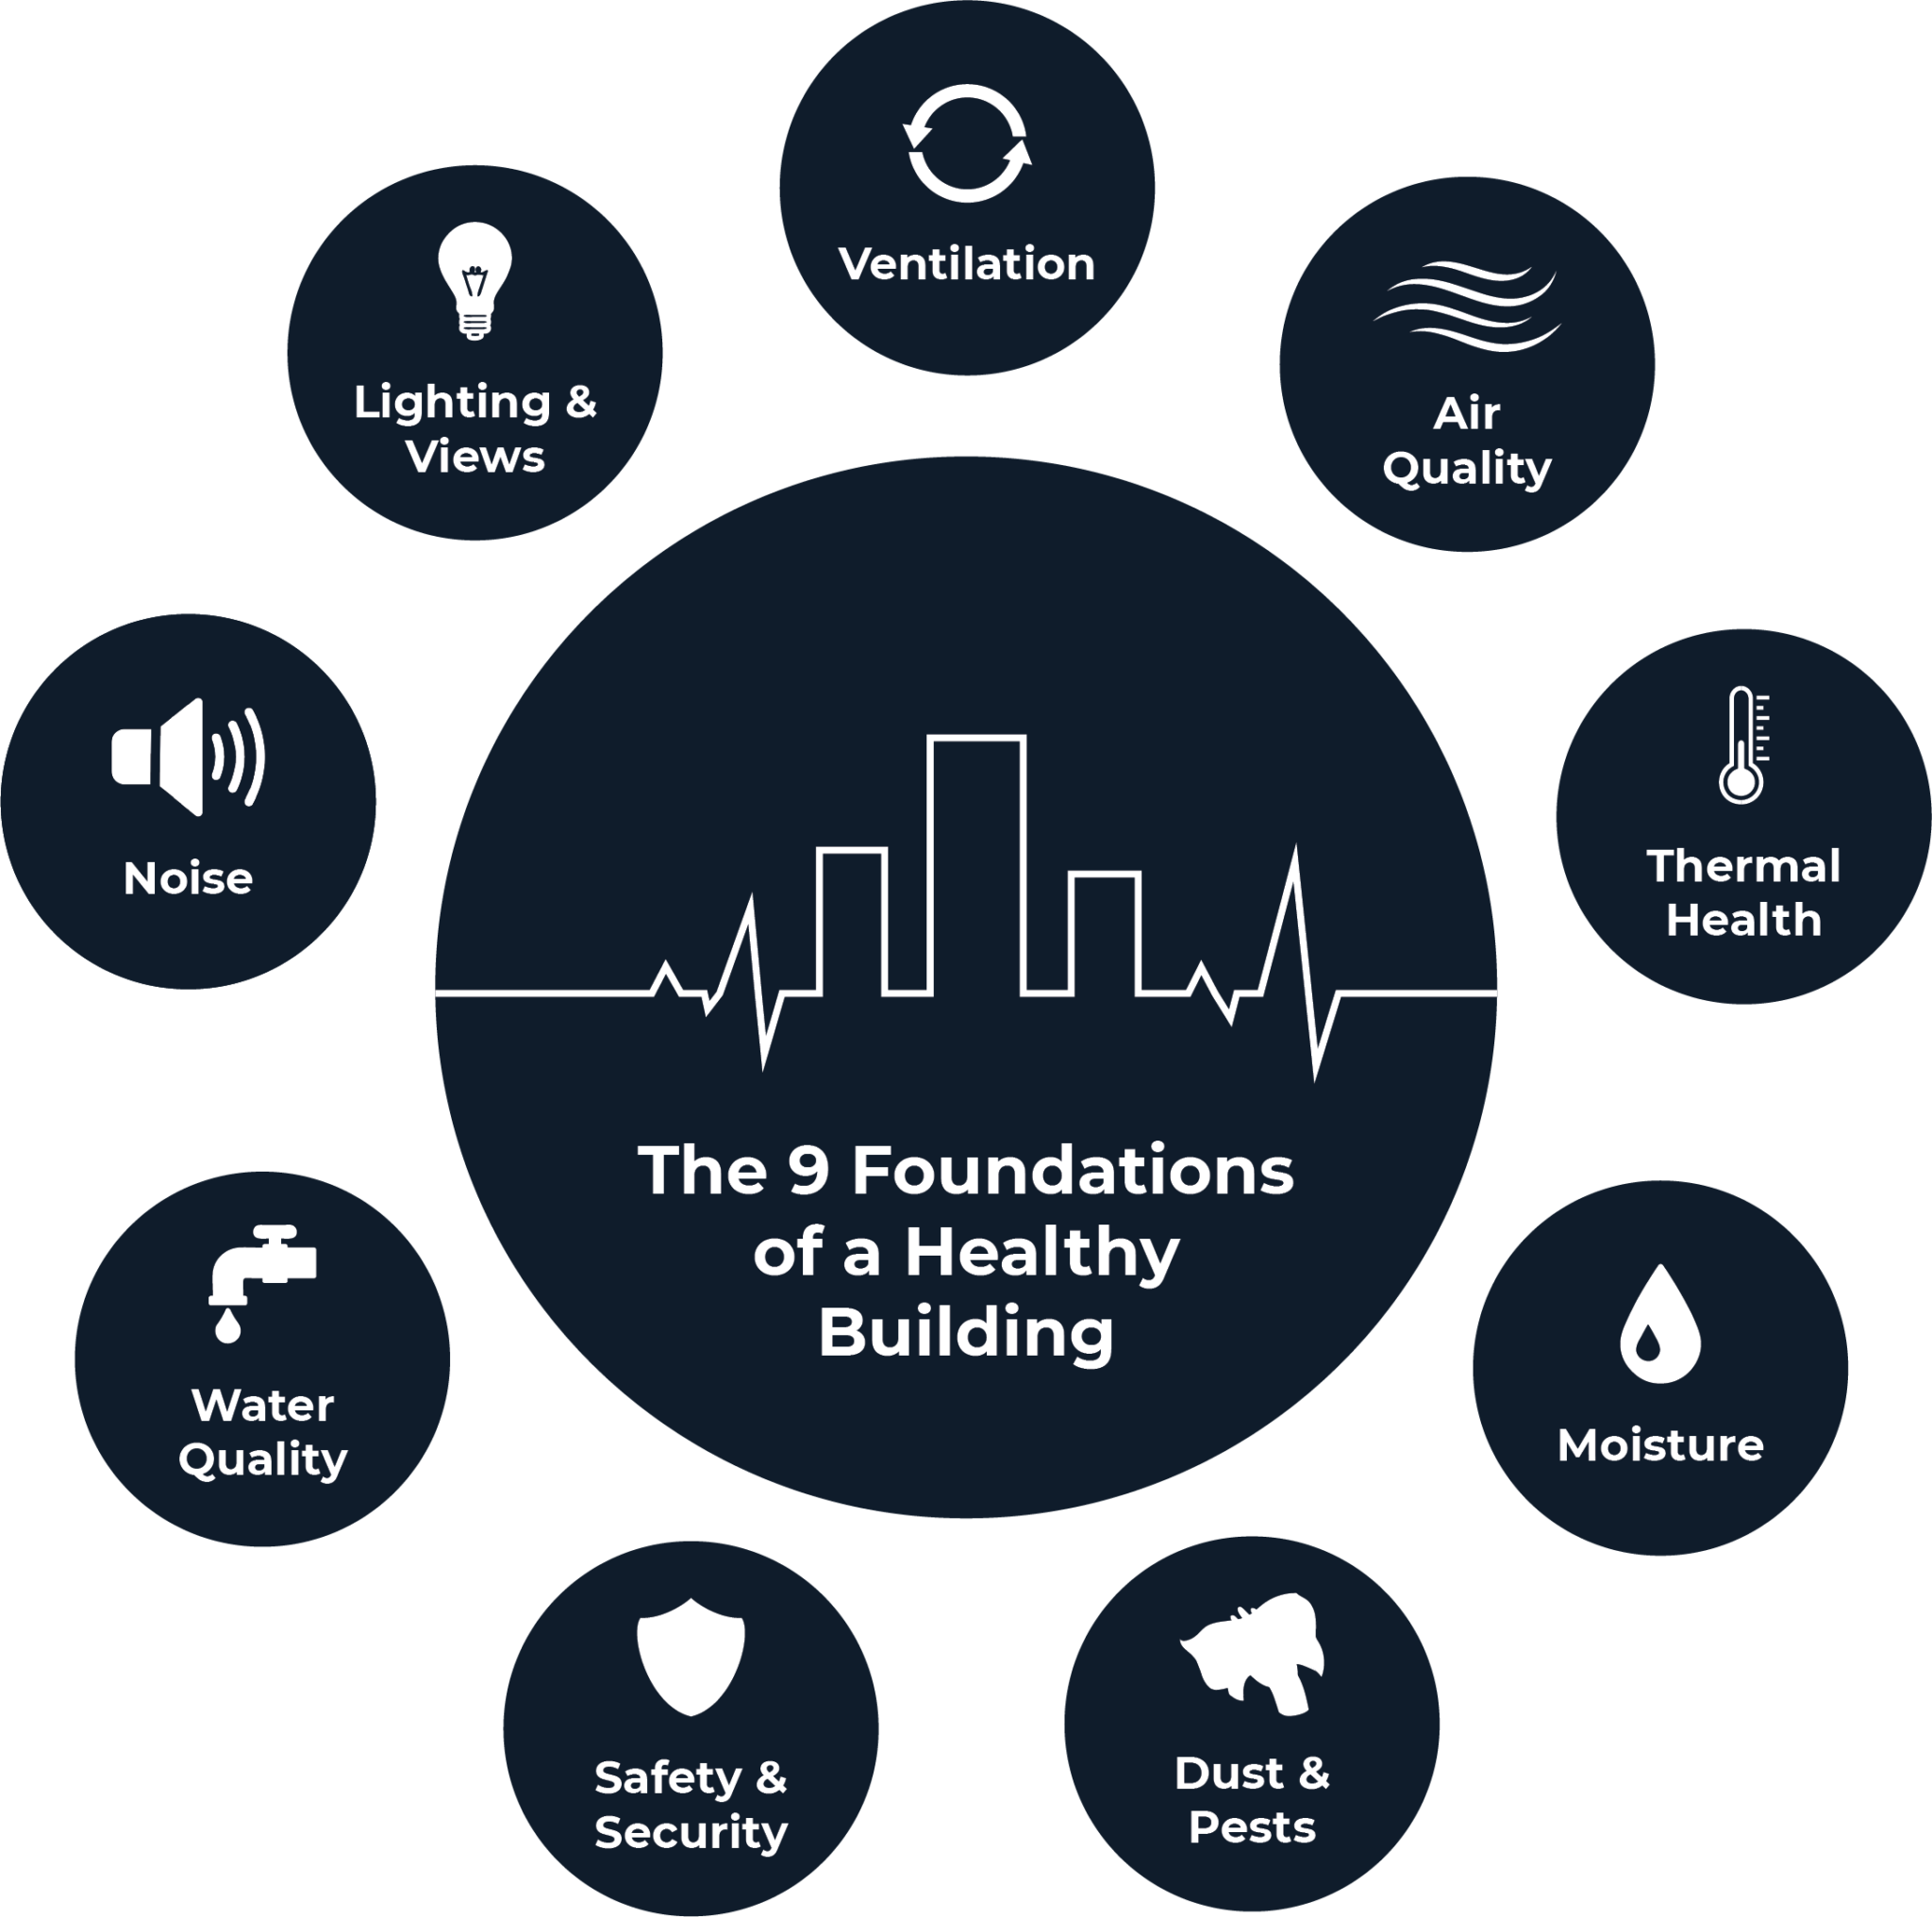 The 9 Foundations of a Healthy Building